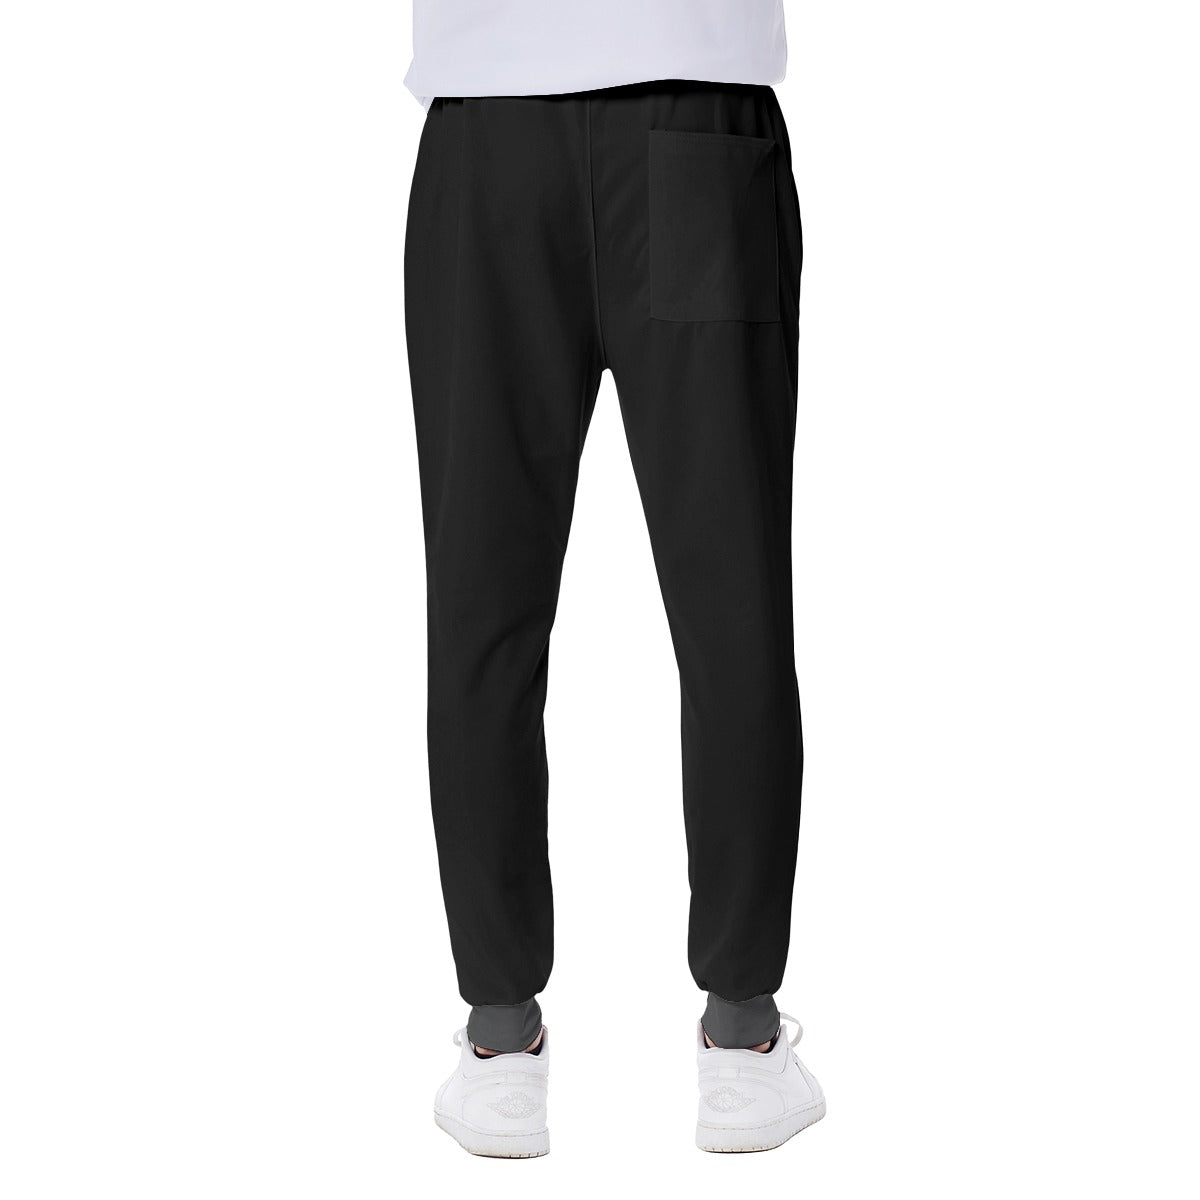 Yoga and Zen Seamless Men's Sweatpants - Personal Hour for Yoga and Meditations 